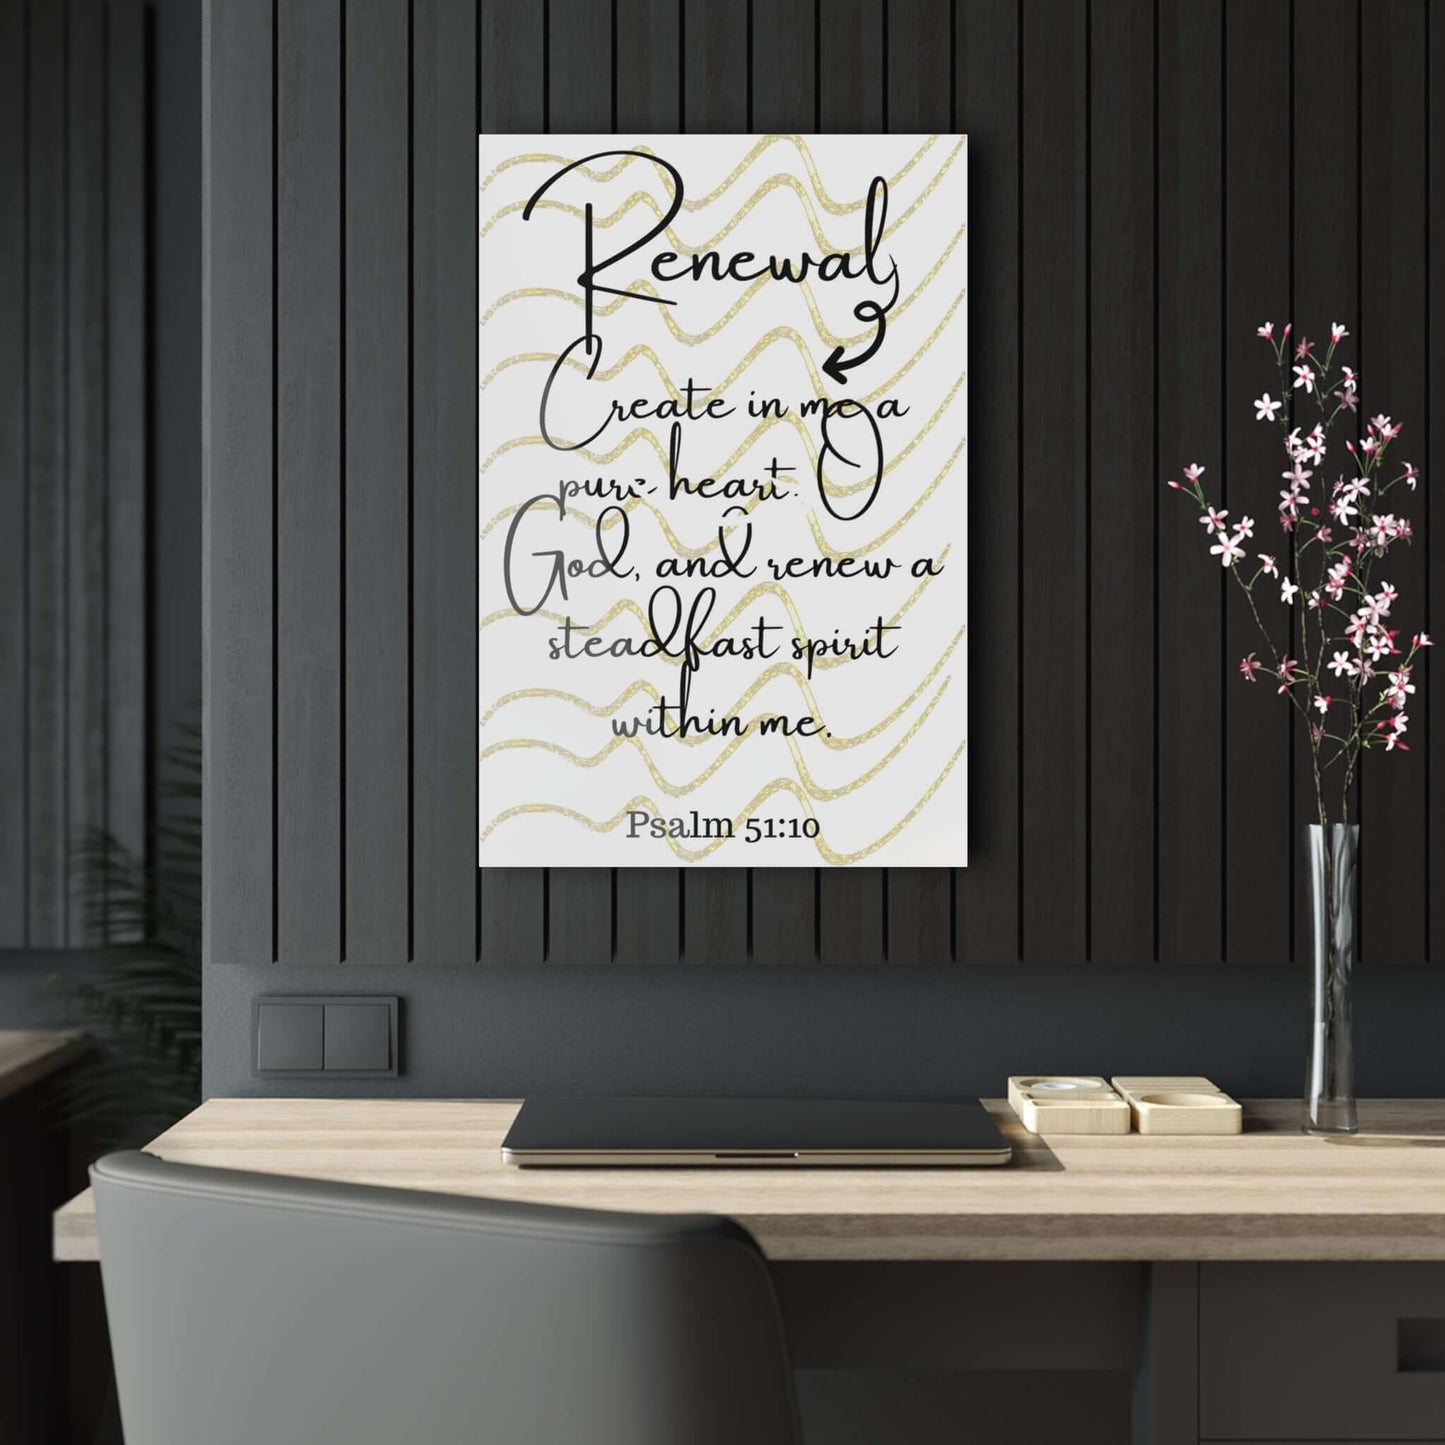 Paintings for Living Room - Acrylic Wall Art with Inspirational Scripture | Art & Wall Decor,Assembled in the USA,Assembled in USA,Decor,Home & Living,Home Decor,Indoor,Made in the USA,Made in USA,Poster